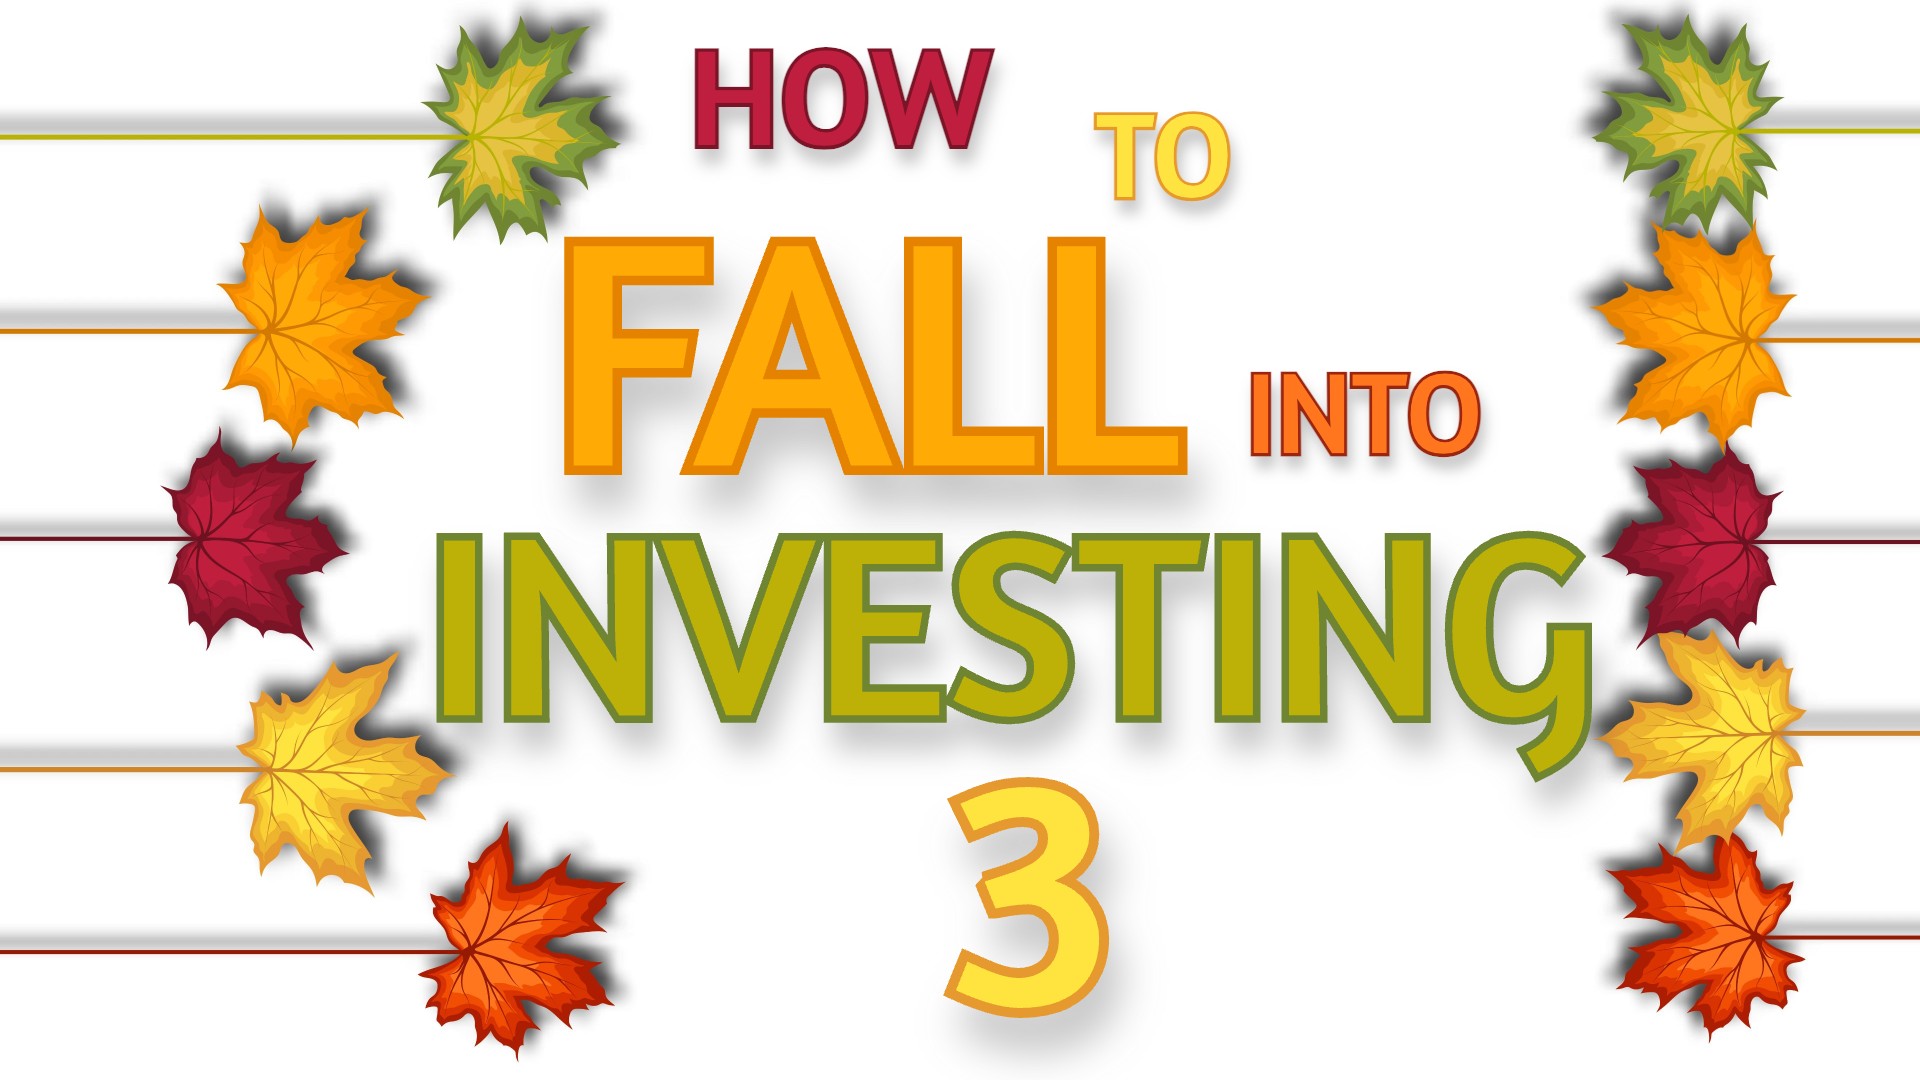 How to FALL into Investing 3